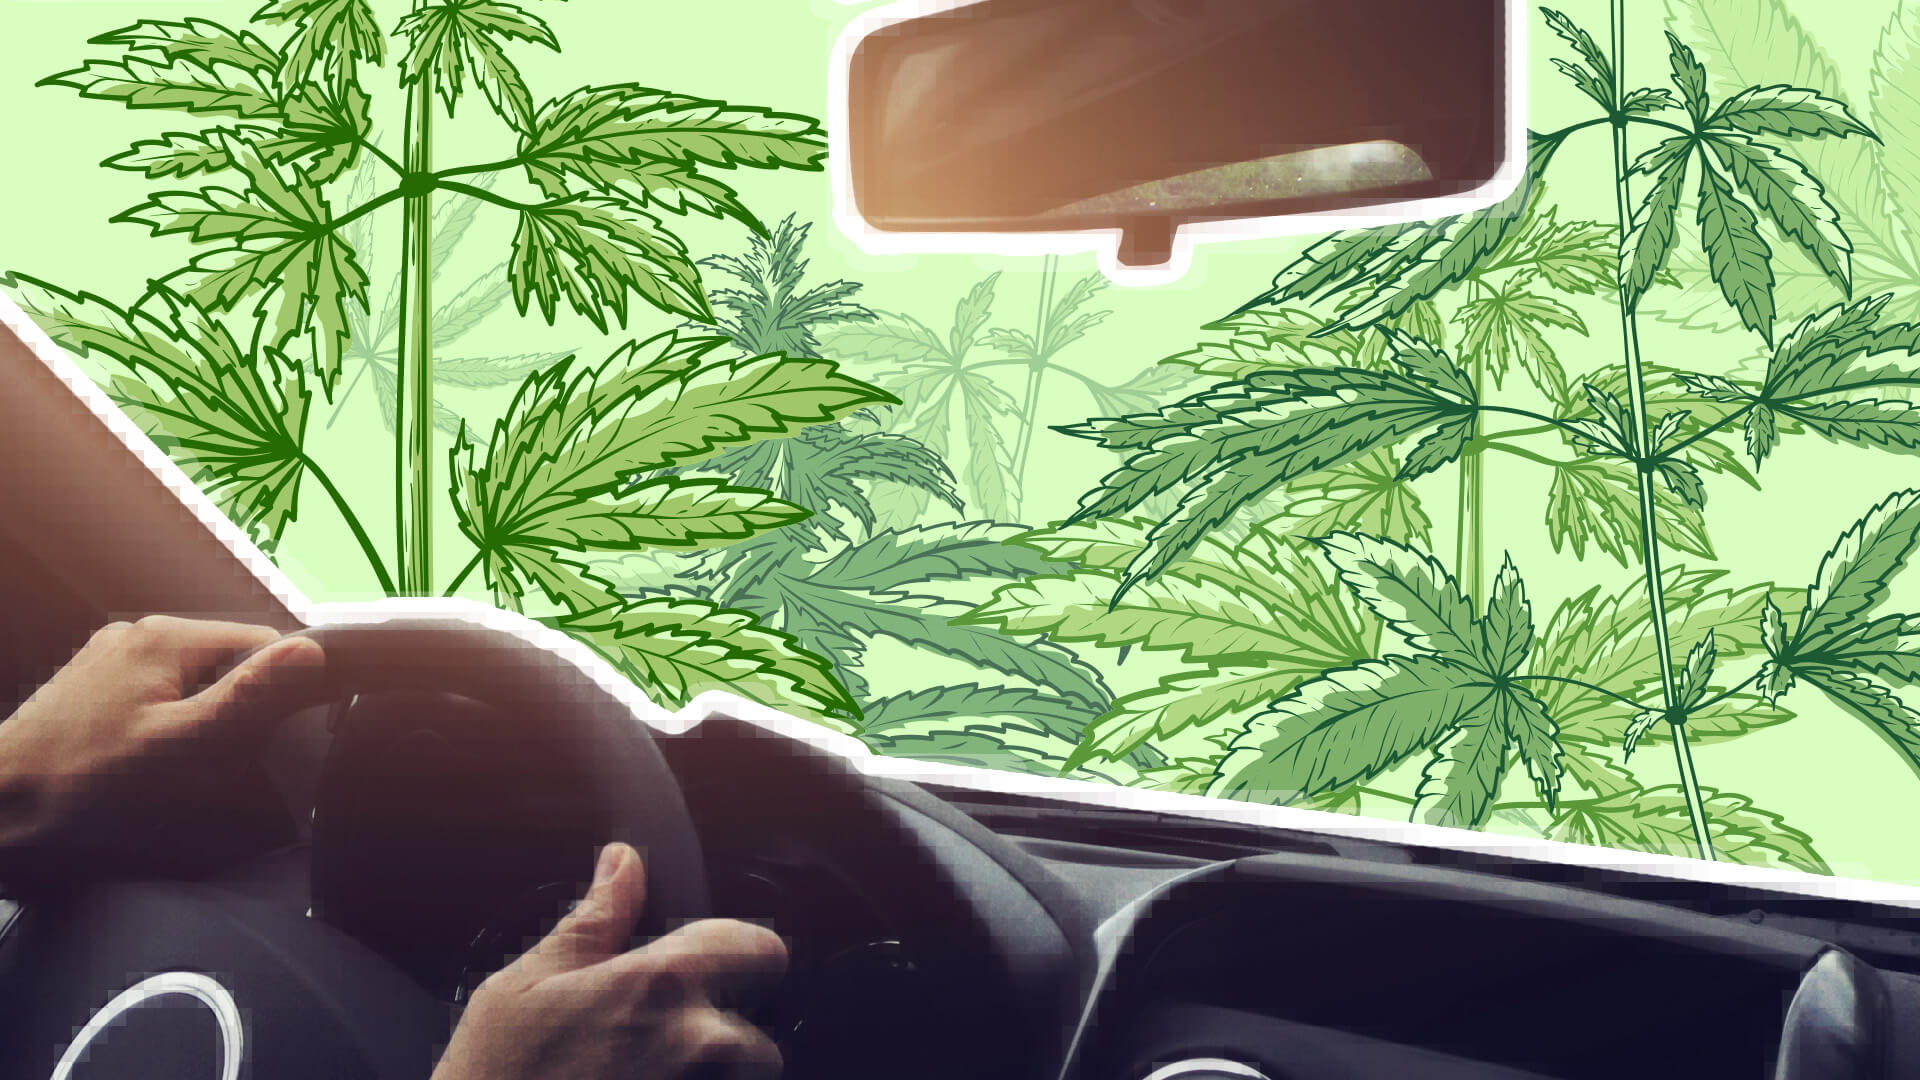 Driving while high